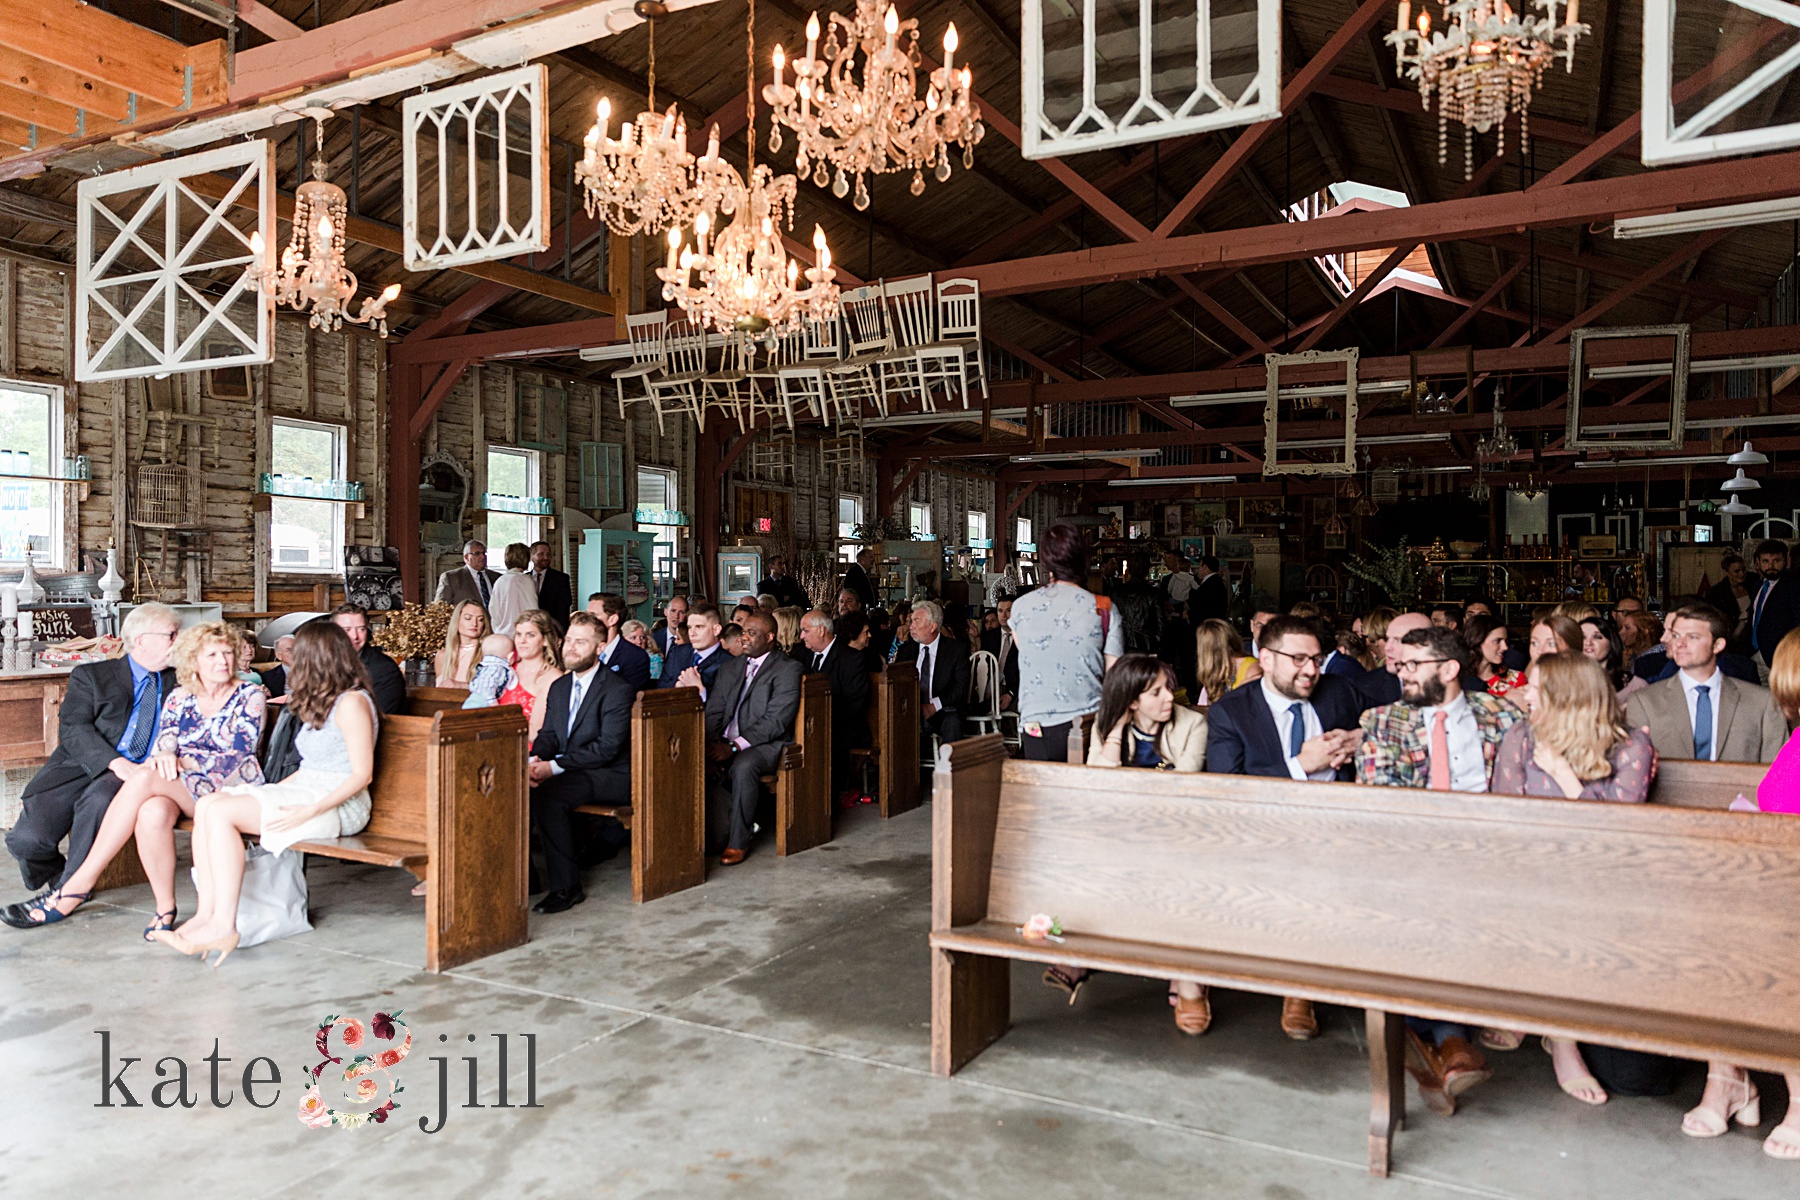 vintage ceremony location with old pews